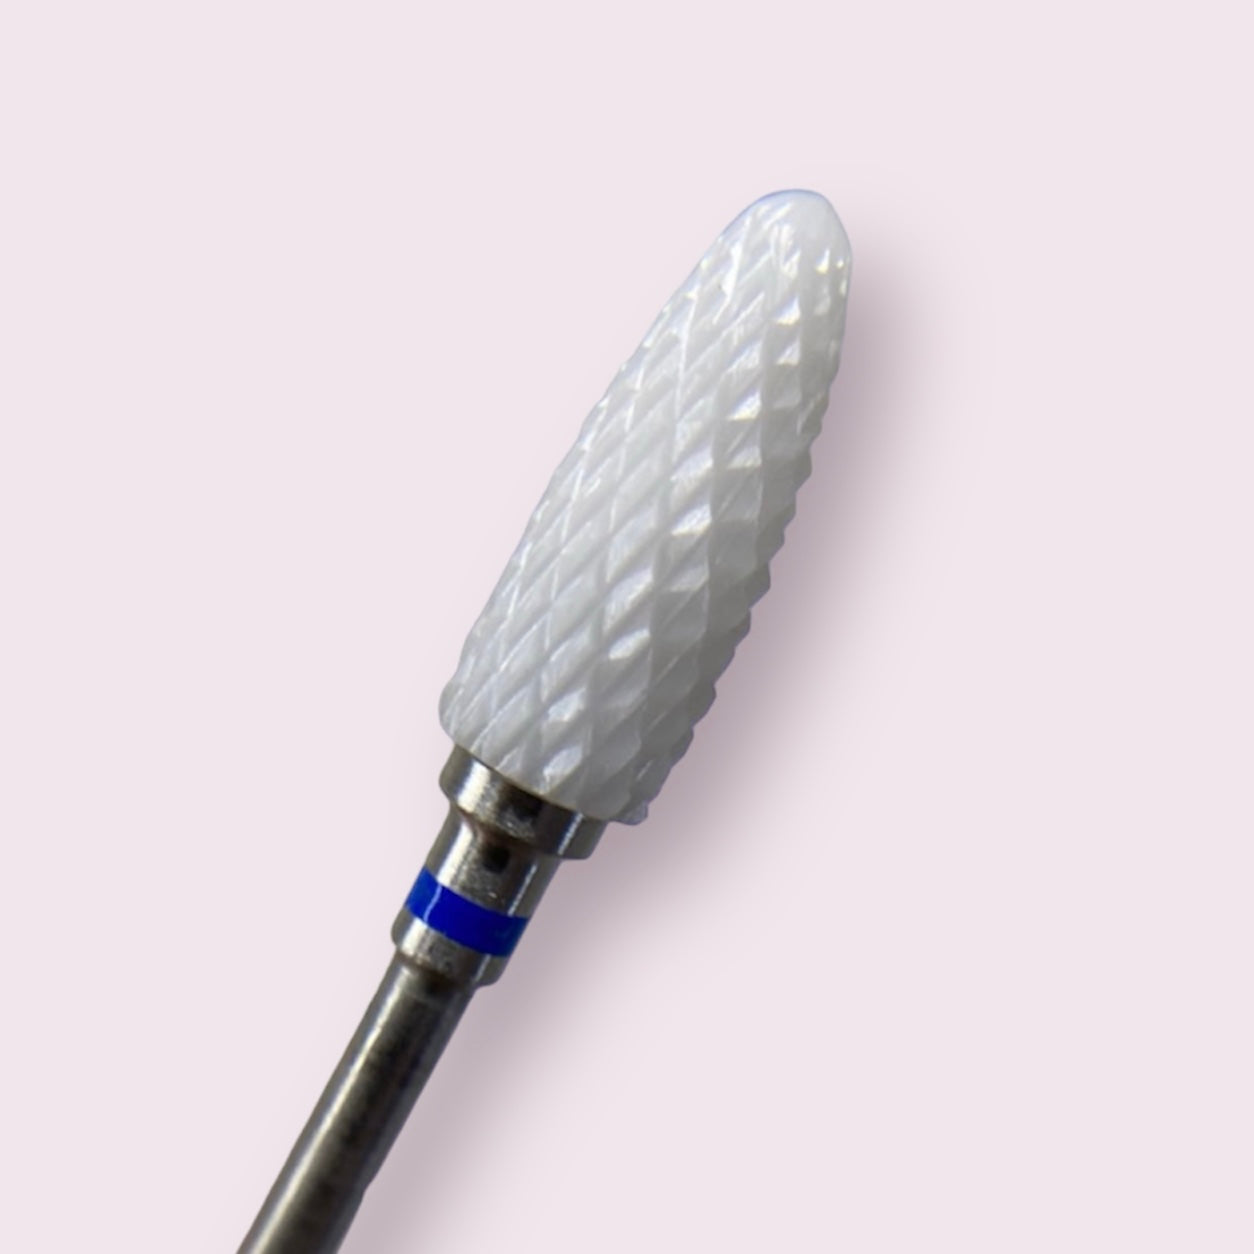 Ceramic Nail Bit for Removal (Bullet), Blue Right Handed, 1pc